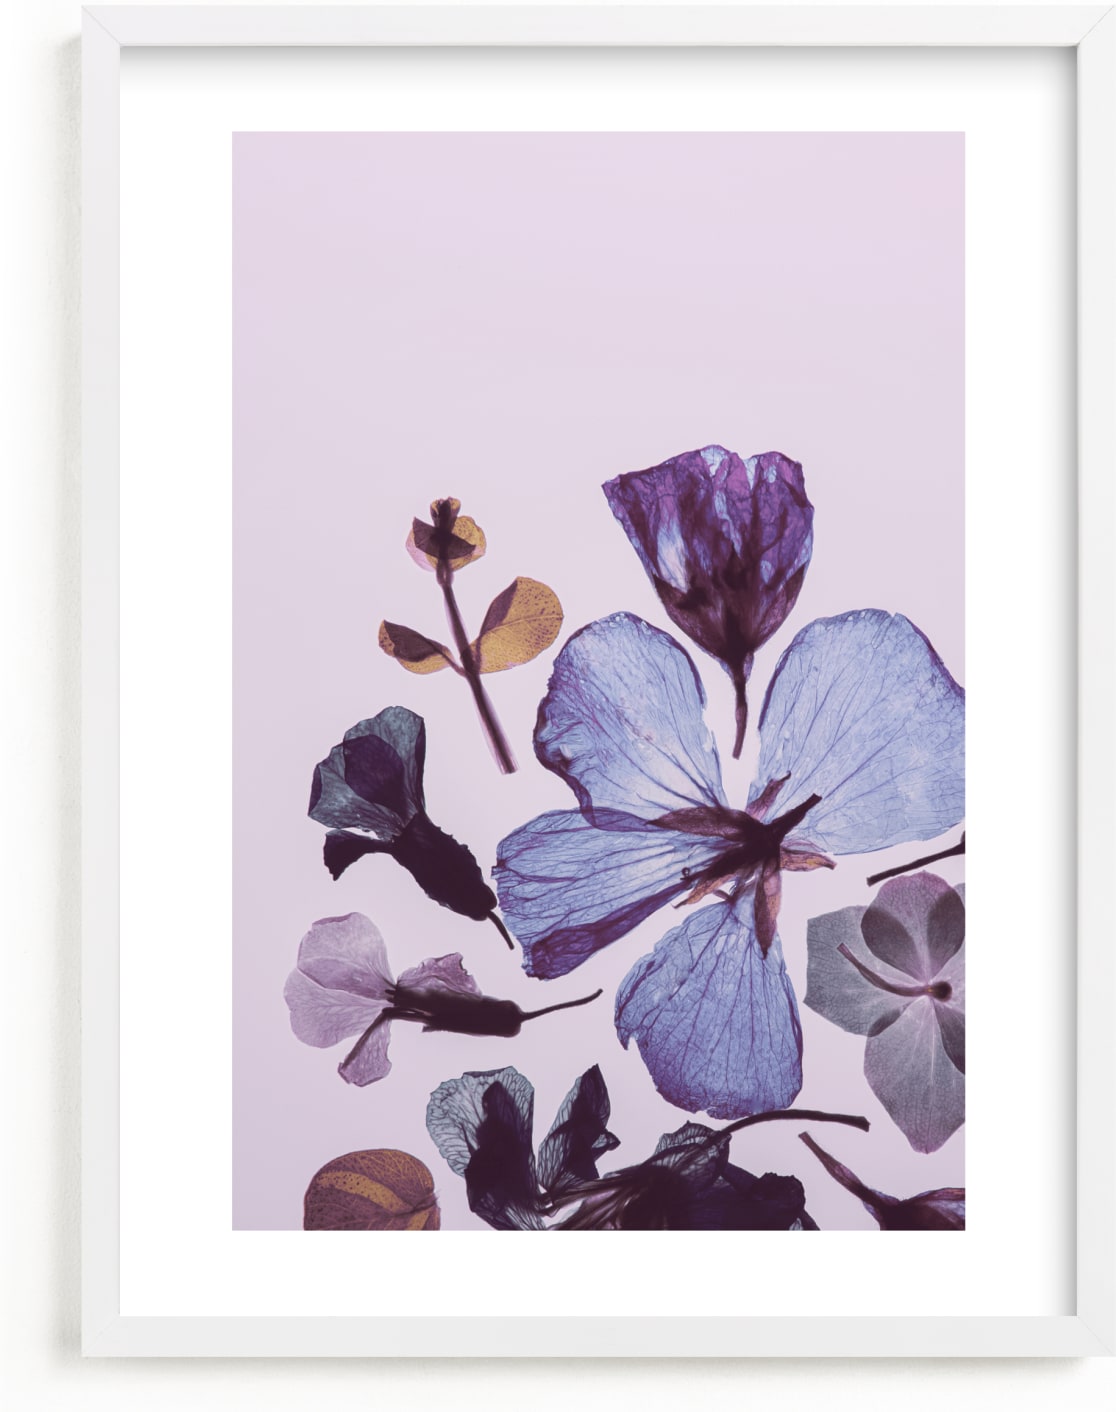 This is a blue kids wall art by Karen Kardatzke called Forever in Bloom.